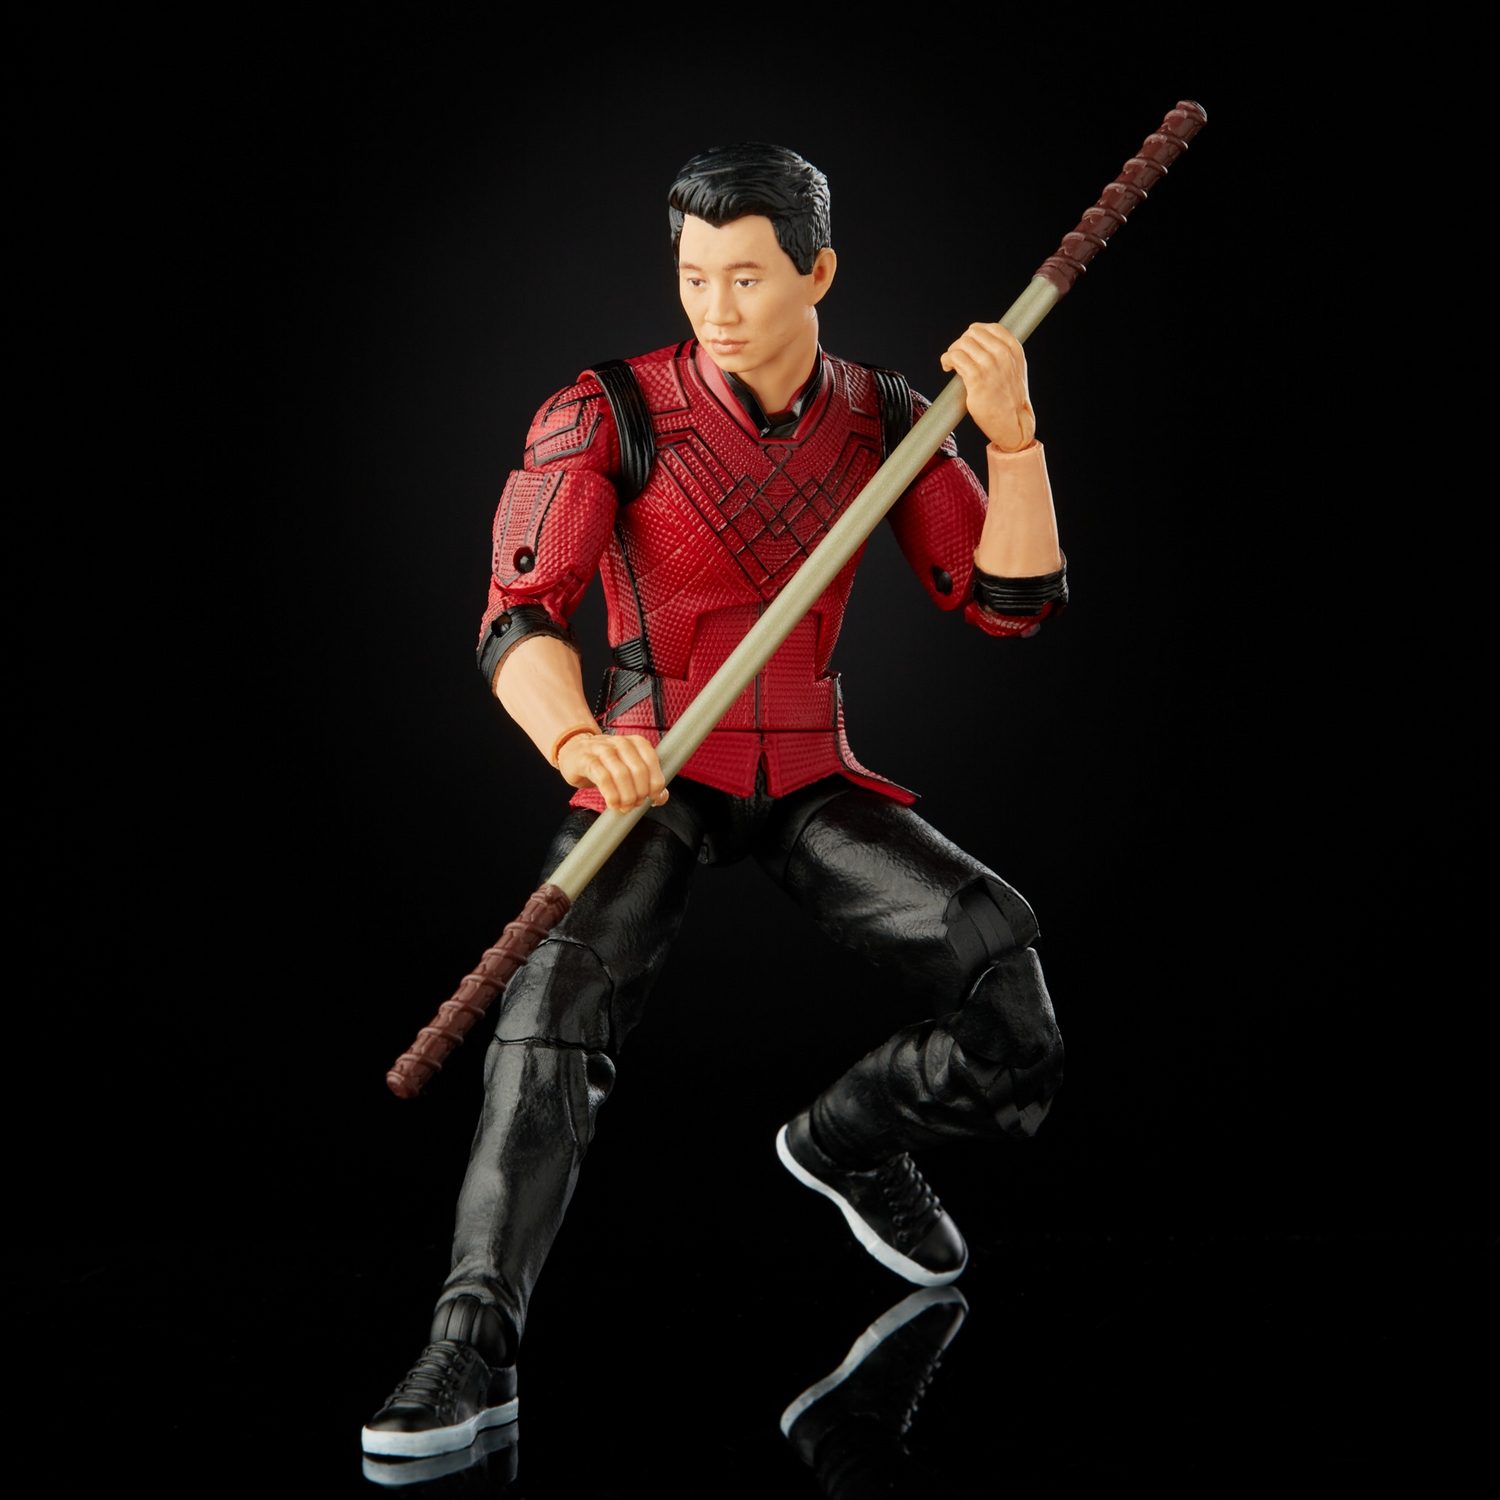 MARVEL LEGENDS SERIES 6-INCH SHANG-CHI AND THE LEGEND OF THE TEN RINGS - Shang-Chi oop2.jpg